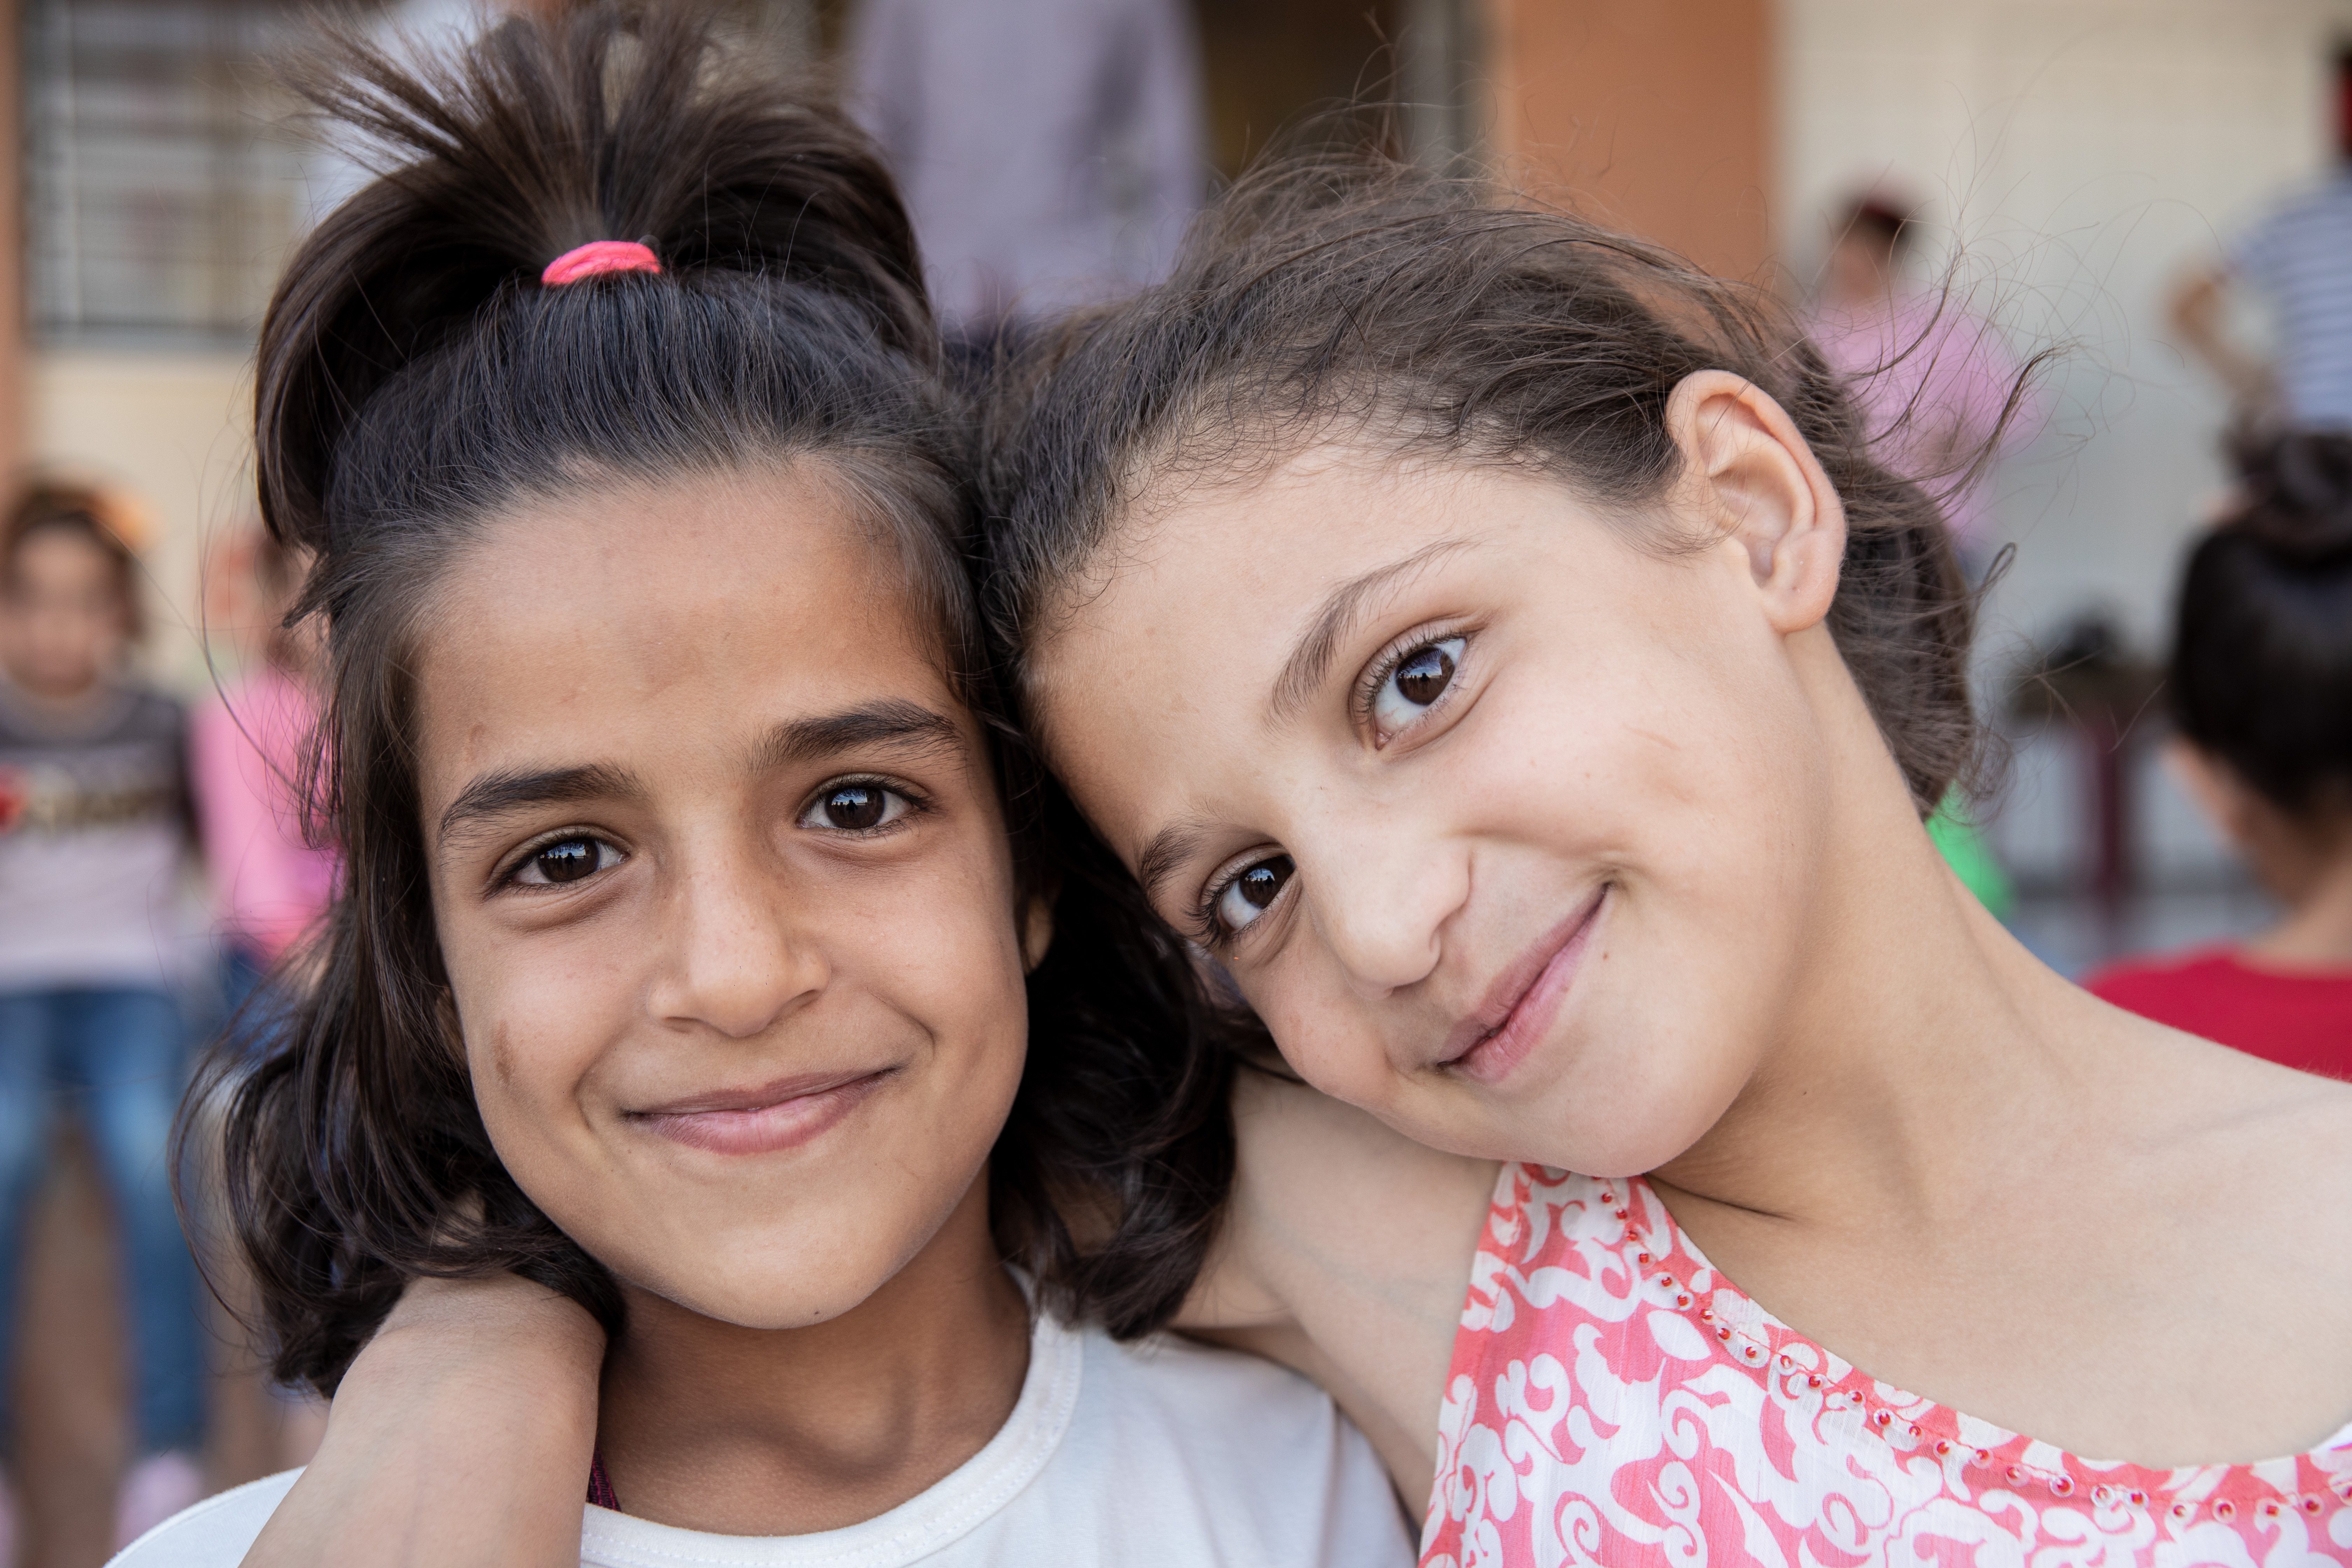 These children (whose names are withheld for security reasons) are attending activities at Child-Friendly Spaces (CFS) in Al-Humeira, a rural area in Qalamoun Valley, Syria, in 2019.